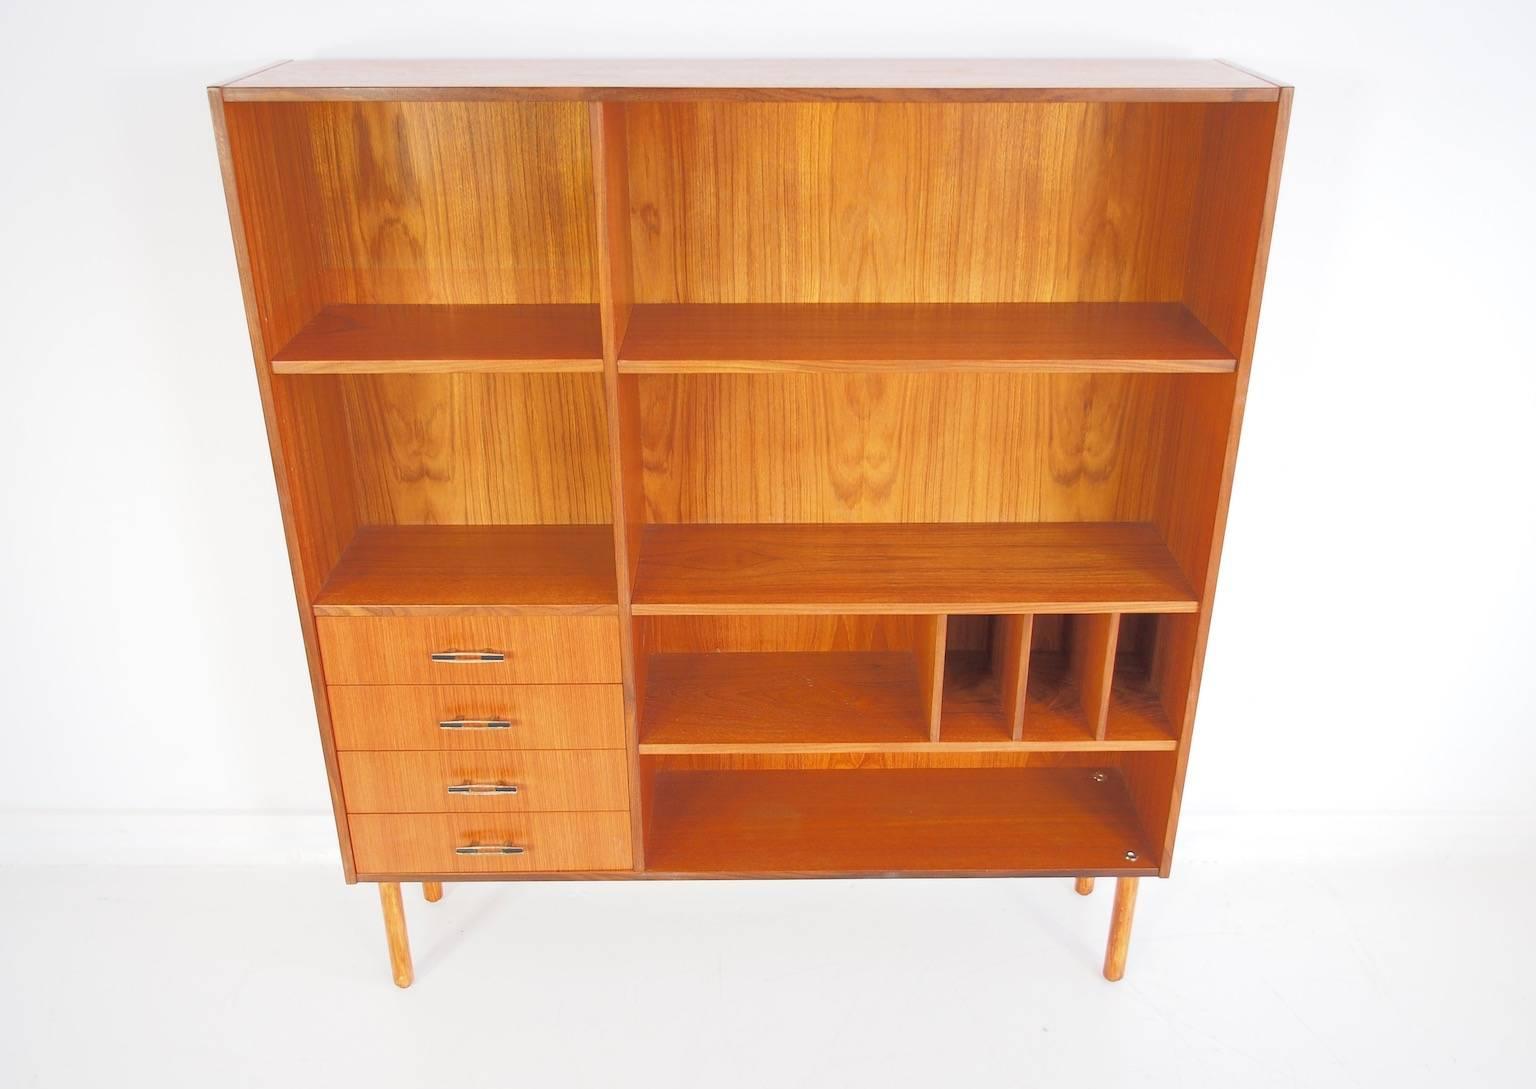 Scandinavian Modern teak bookshelf or shelving unit with four drawers, shelves and smaller storage compartments. Legs made of pine.